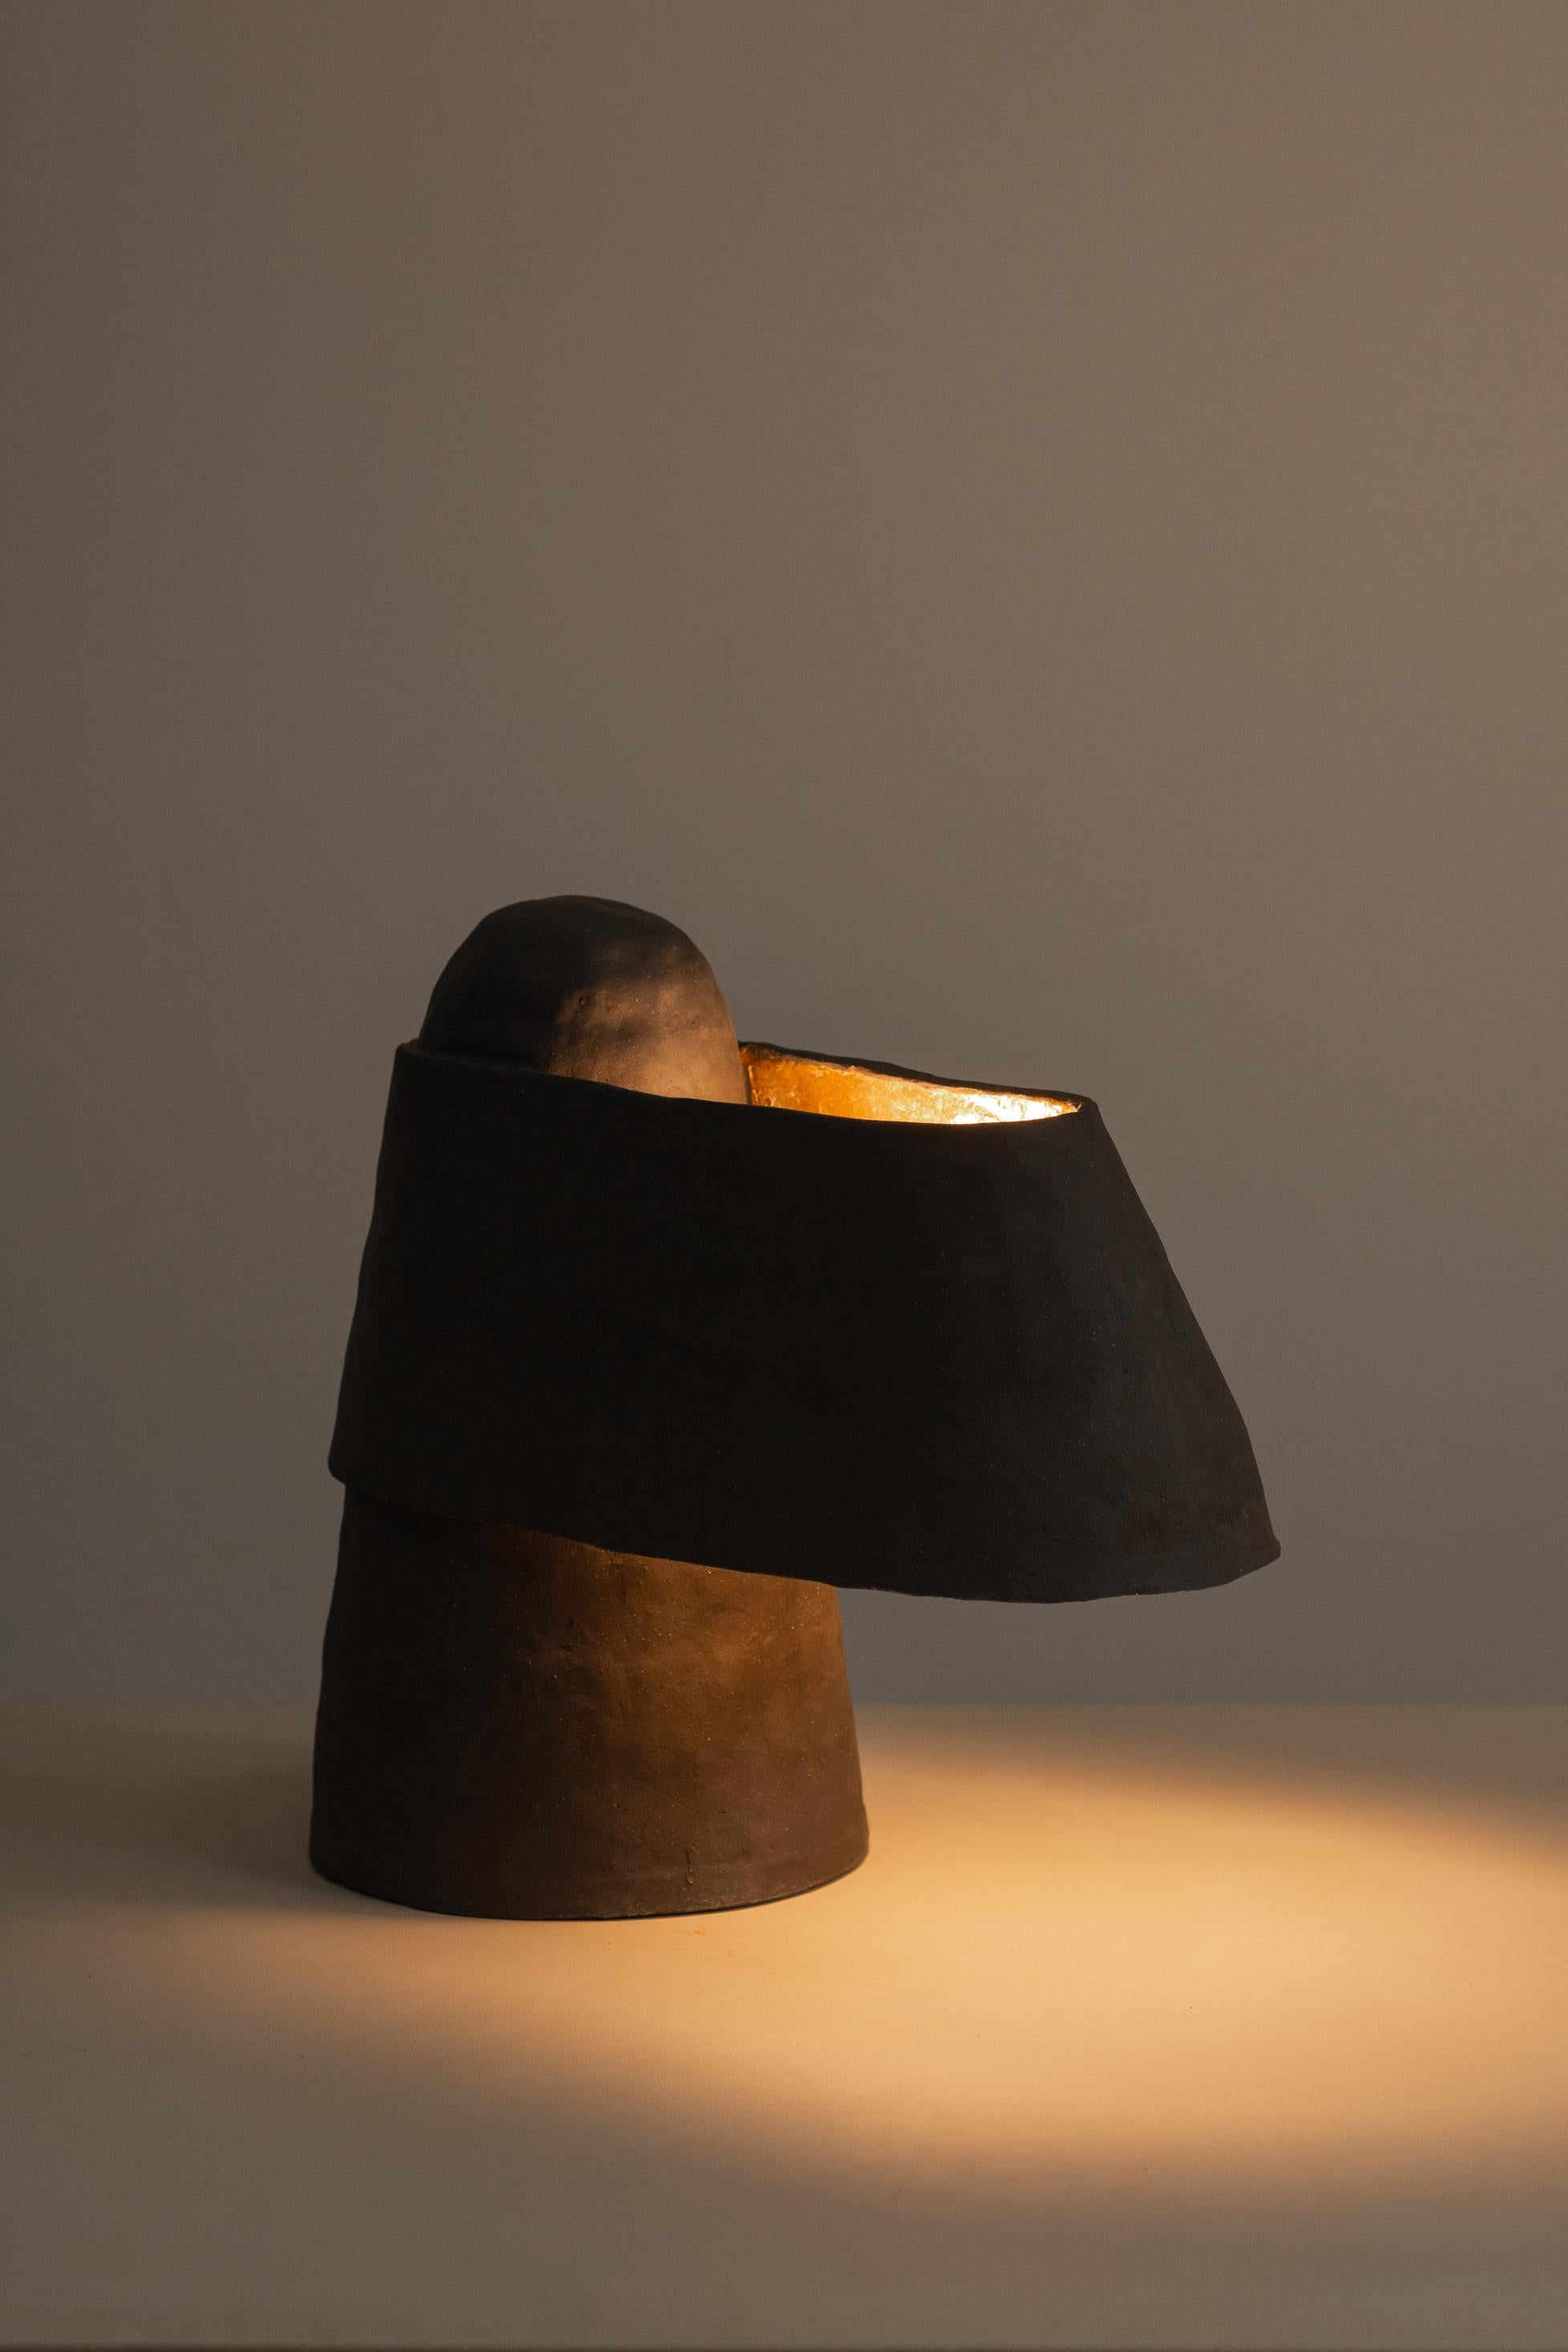 the elara lamp is part of the brutalism series and brings aesthetic references to the homonymous movement of modern architecture that emphasized the 